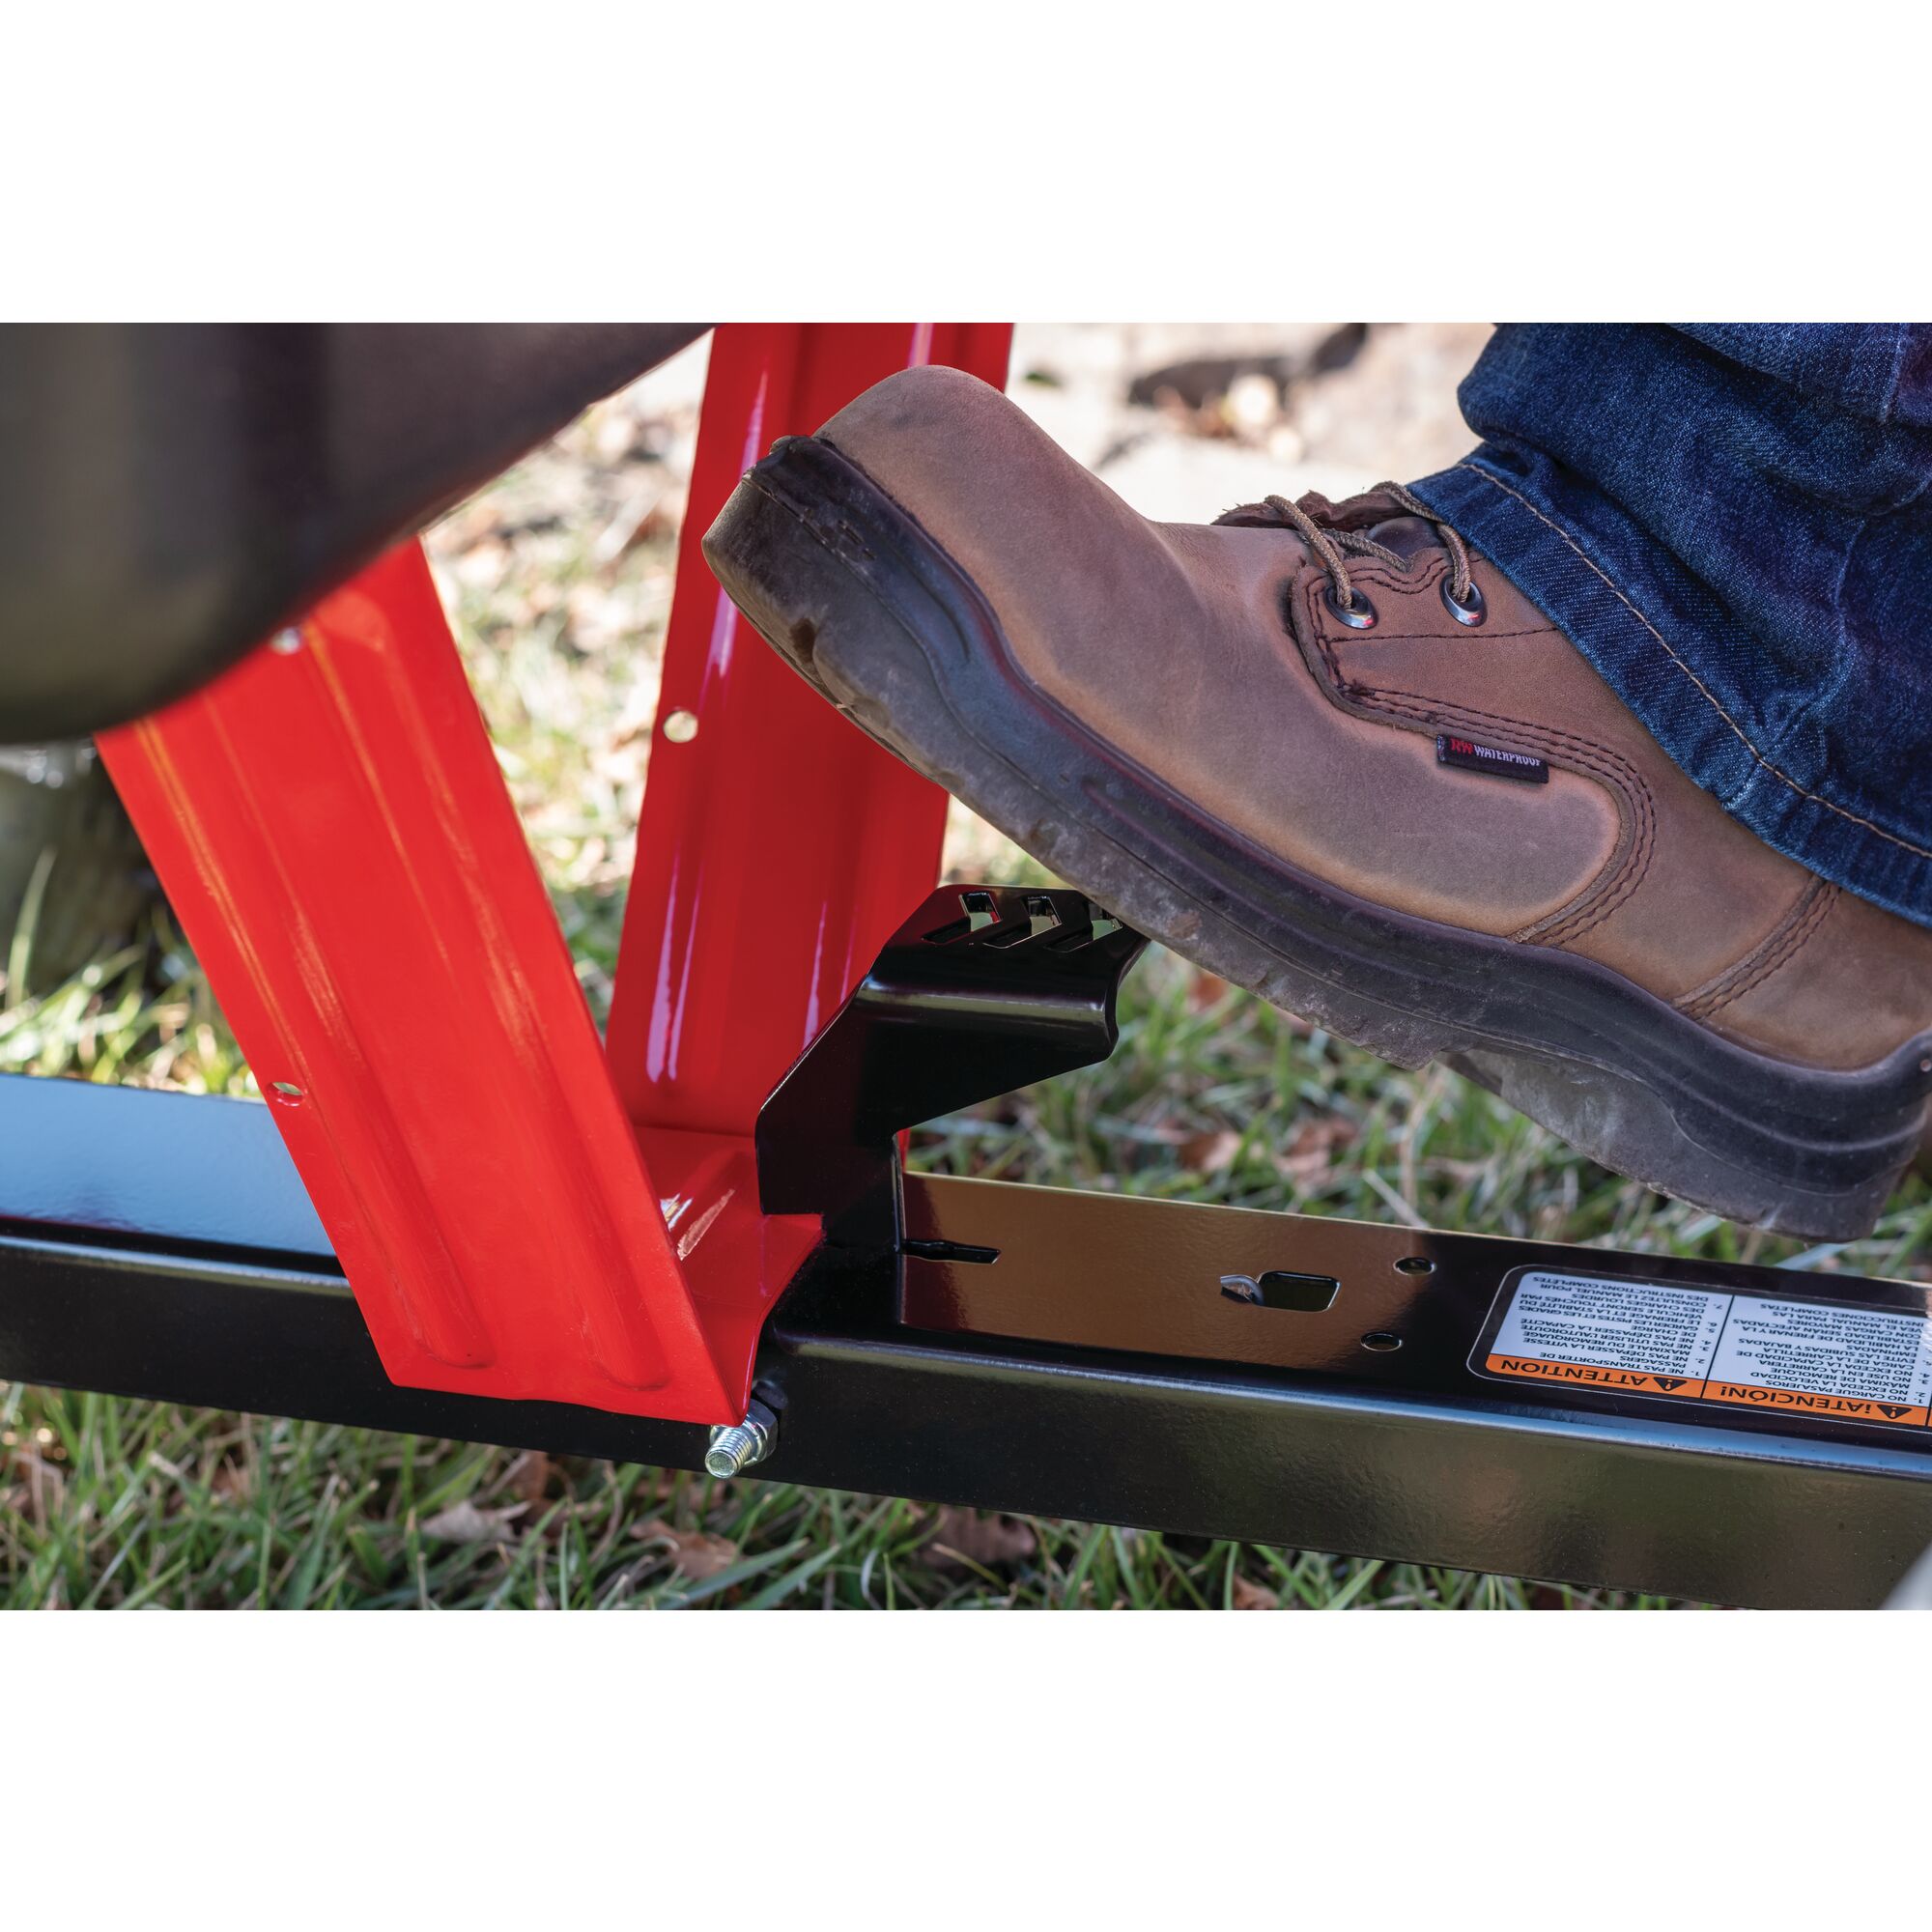 10 cubic foot poly cart foot pedal dump release being used.